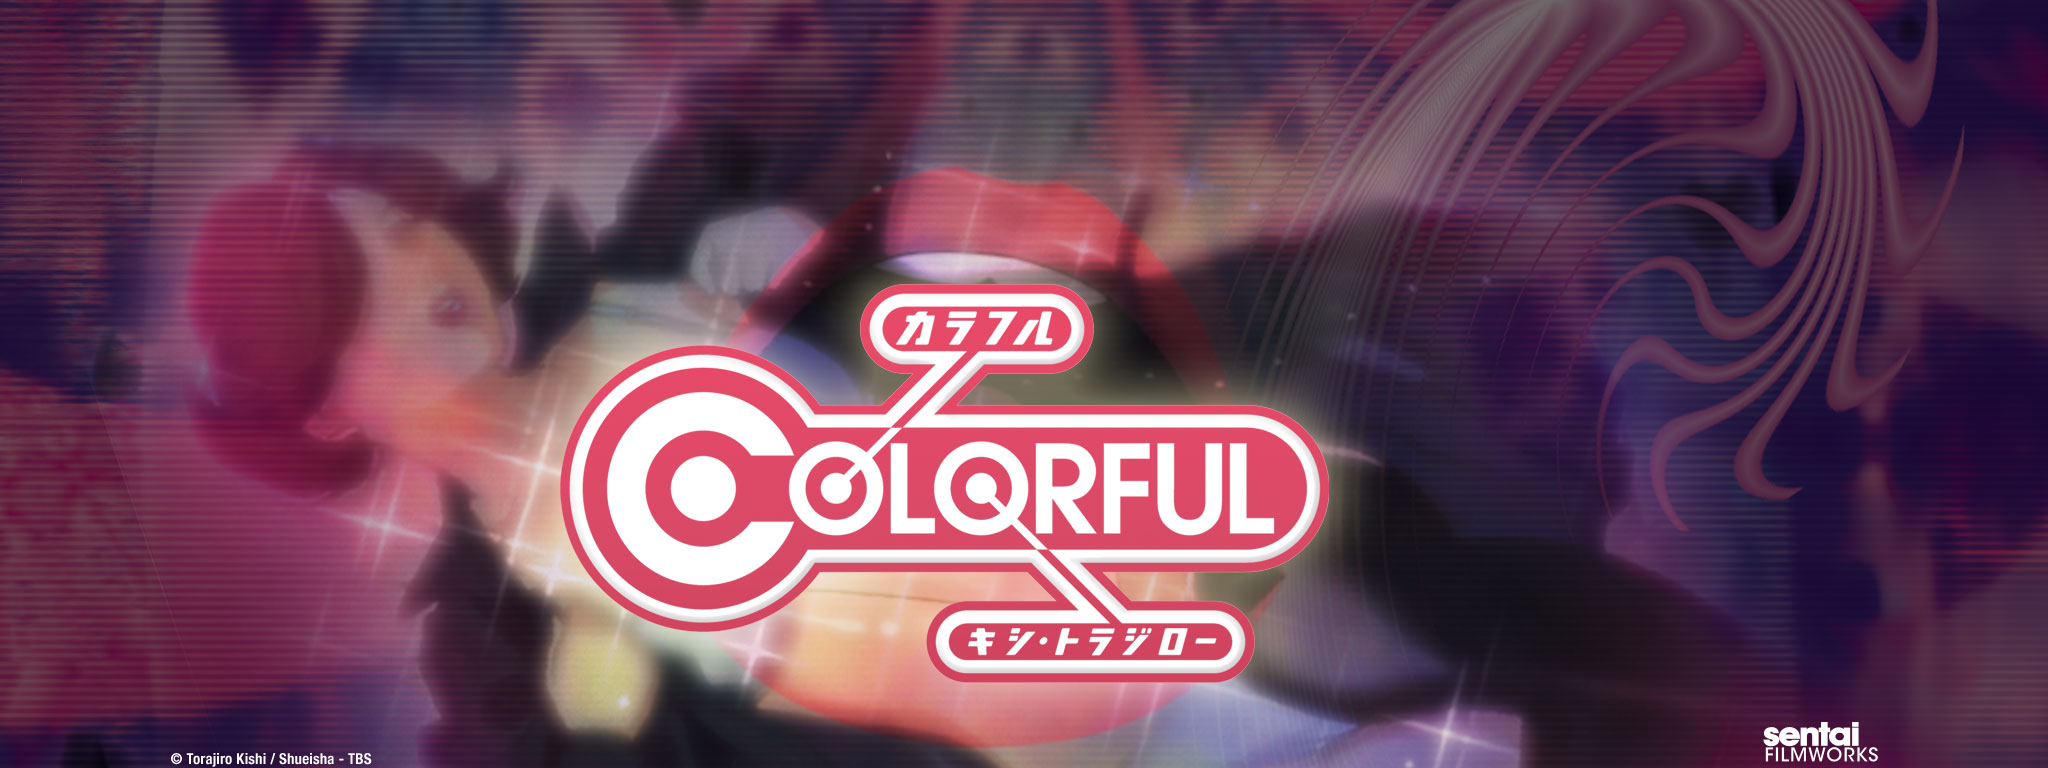 Title Art for Colorful